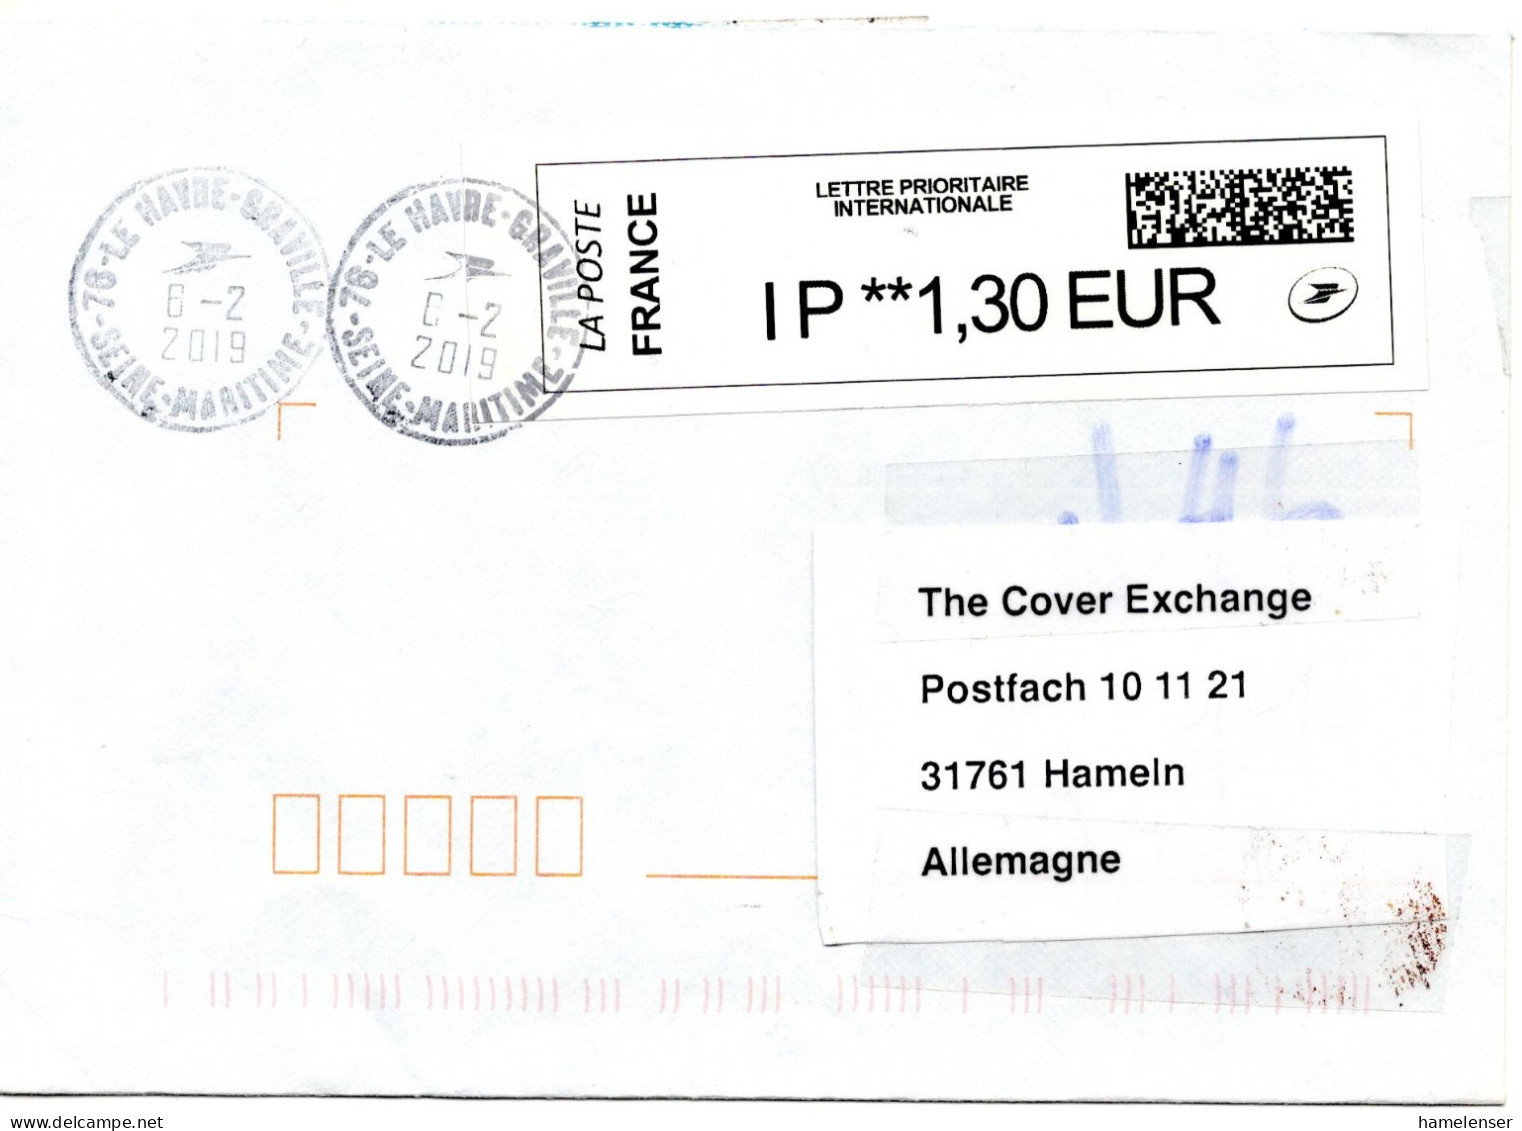 61246 - Frankreich - 2019 - €1,30 ATM EF A Bf LE HAVRE -> Deutschland - Covers & Documents